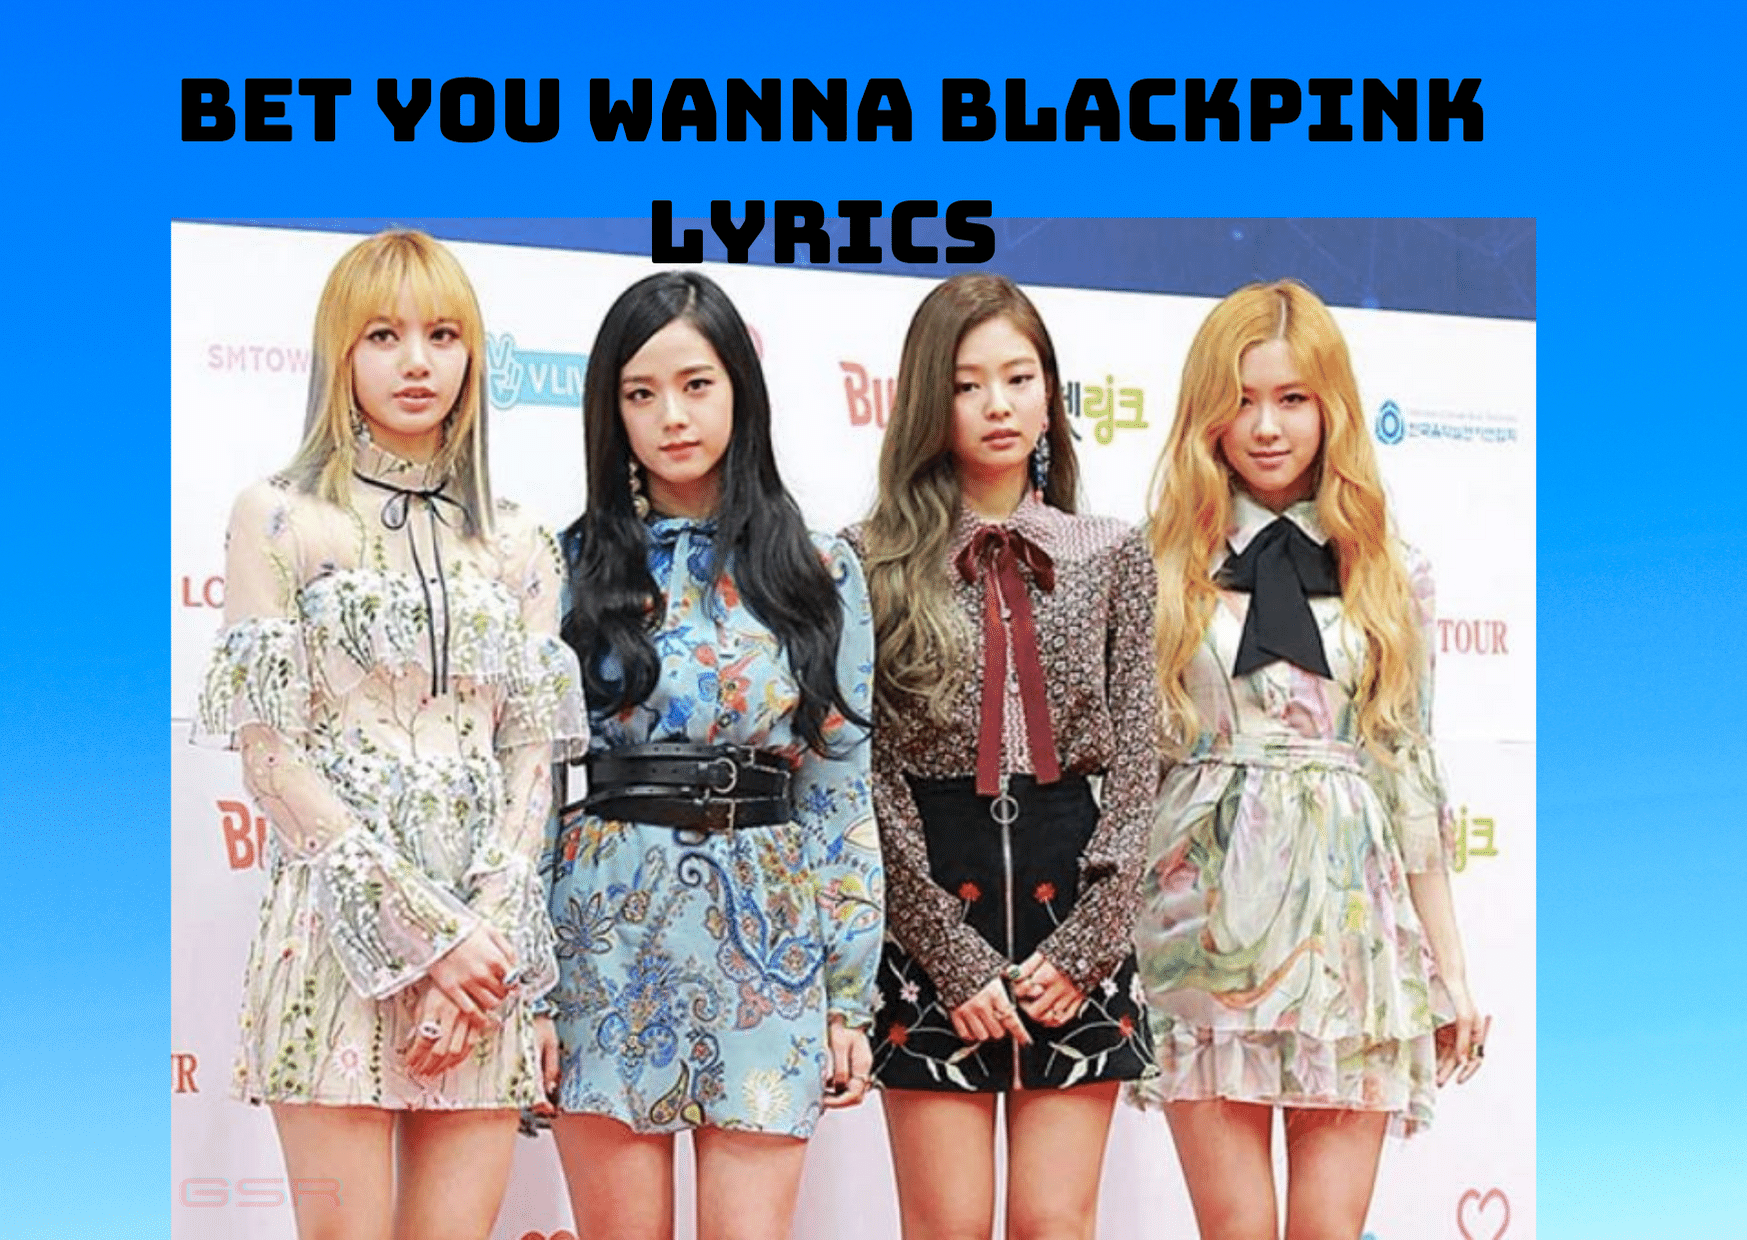 Bet You Wanna Blackpink Lyrics The Album is the first Korean-language studio album by South Korean girl group Blackpink, released on October 2, 2020, through YG Entertainment and Interscope. The album was released for pre-order on August 28. View this post on Instagram #BLACKPINK #블랙핑크 #1stFULLALBUM #THEALBUM #D_DAY #20201002_12amEST #20201002_1pmKST #Release #YG A post shared by BLΛƆKPIИK (@blackpinkofficial) on Oct 1, 2020 at 8:00am PDT [su_youtube url="https://youtu.be/ABH4dhFZiew" autoplay="yes"] [su_heading]Bet You Wanna Blackpink Lyrics[/su_heading] Blackpink Cardi Tell Me Where You Wanna Go I’ll Meet You With My Bags Out The Door Uh I’m Gonna Make You Go Blind Every Time I Walk My Hips They Don’t Lie Take Me To Your Paradise ‘Coz I Don’t Wanna Wait Anymore Uh I’ll Say It One More Time Every Time I Walk My Hips They Don’t Lie You Wanna Touch Wanna Touch Of Course You Wanna You Wanna Run With My Love But Now You Wanna From The Club To The Tube You Said You Wanna Give Me An All Night Hook Up Bet You Wanna I Bet You Wanna I Bet You Wanna I Bet You I Bet You I Bet You Wanna I Bet You Wanna I Bet You Wanna Something About Me Taking You Higher Hey And You Ain’t Ever Gonna Comе Down You Ain’t Ever You Ain’t Evеr I’m Lighting Your Fire Huh And It Ain’t Ever Gonna Go Out It Ain’t Ever It Ain’t Ever Car Take The Car Keys Drive Me Crazy Cardi A Good Catch But You Gotta Chase Me Grab My Waist Line But Don’t Ever Waste Me Turn On Please Me But Don’t Ever Play Me One Of A Kind You Can’t Replace Me Time To Shine I Buss Down The Ap The Stakes Is Higher Let’s Do What We Both Desire On God Like I’m In The Choir I Bet You If You Make Me Sweat I’ll Still Be On Fire You Wanna Touch Wanna Touch Of Course You Wanna You Wanna Run With My Love But Now You Wanna From The Club To The Tube You Said You Wanna Give Me An All Night Hook Up Bet You Wanna I Bet You Wanna I Bet You Wanna I Bet You I Bet You I Bet You Wanna I Bet You Wanna I Bet You Wanna Something About Me Taking You Higher Hey And You Ain’t Ever Gonna Come Down You Ain’t Ever You Ain’t Ever I’m Lighting Your Fire Huh And It Ain’t Ever Gonna Go Out It Ain’t Ever It Ain’t Ever If You Want Me Me Bet A Bit Higher Wanna Look Down Down Up In The Sky Higher Higher Higher Higher Higher Boy Better Pick It Up So Down High Looking So Thick Thick Make Him Desire I’m A Whole Bit Bit Keep You Up Higher Higher Higher Higher Higher Higher Something About Me Taking You Higher Ohh And You Ain’t Ever Gonna Come Down Down You Ain’t Ever You Ain’t Ever I’m Lighting Your Fire And It Ain’t Ever Gonna Go Out It Ain’t Ever It Ain’t Ever Something About Me Taking You Higher Ohh And You Ain’t Ever Gonna Come Down Down You Ain’t Ever You Ain’t Ever Bet You Wanna Love This Eh